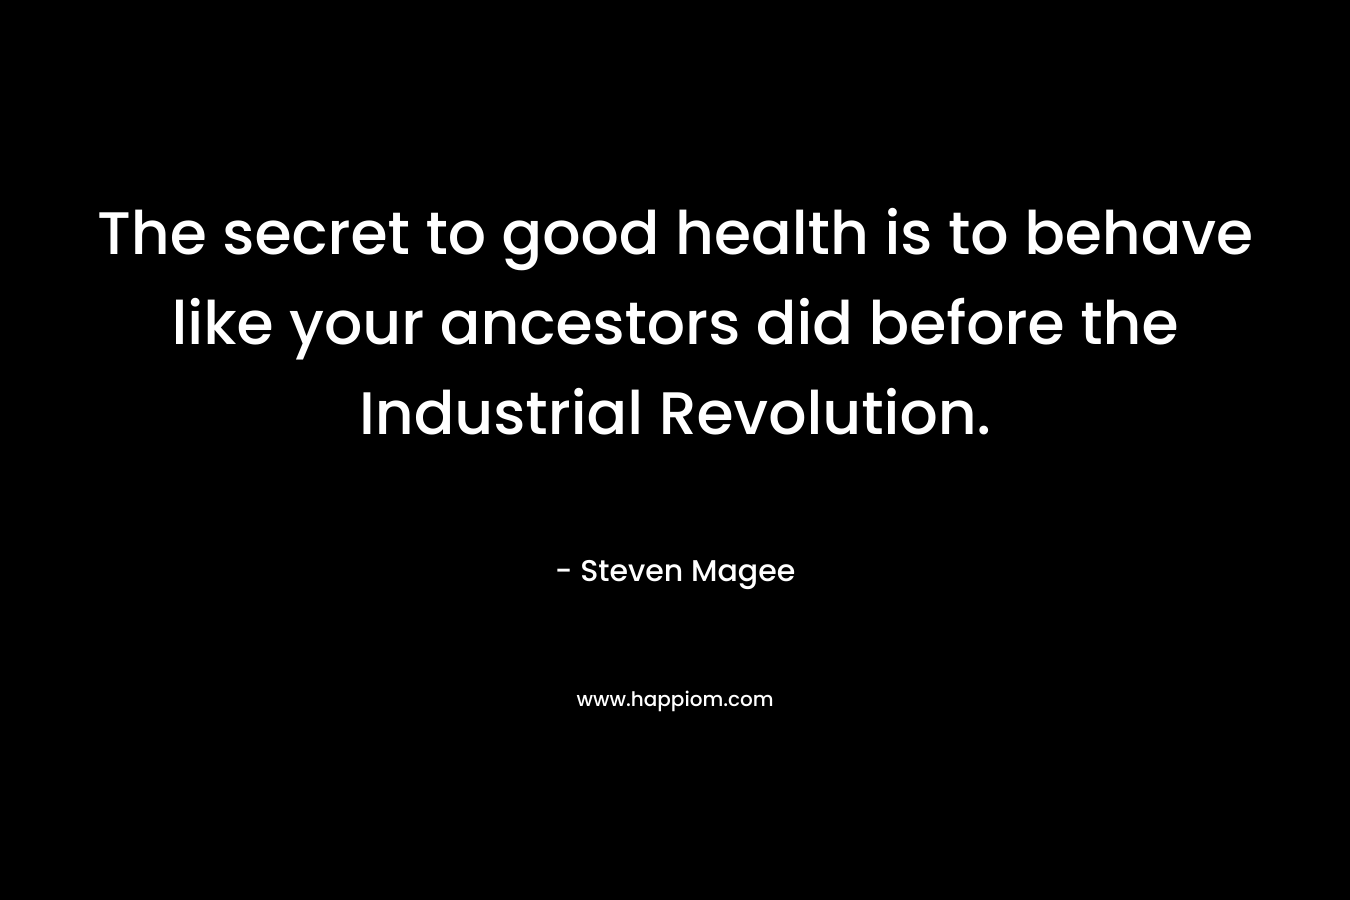 The secret to good health is to behave like your ancestors did before the Industrial Revolution. – Steven Magee